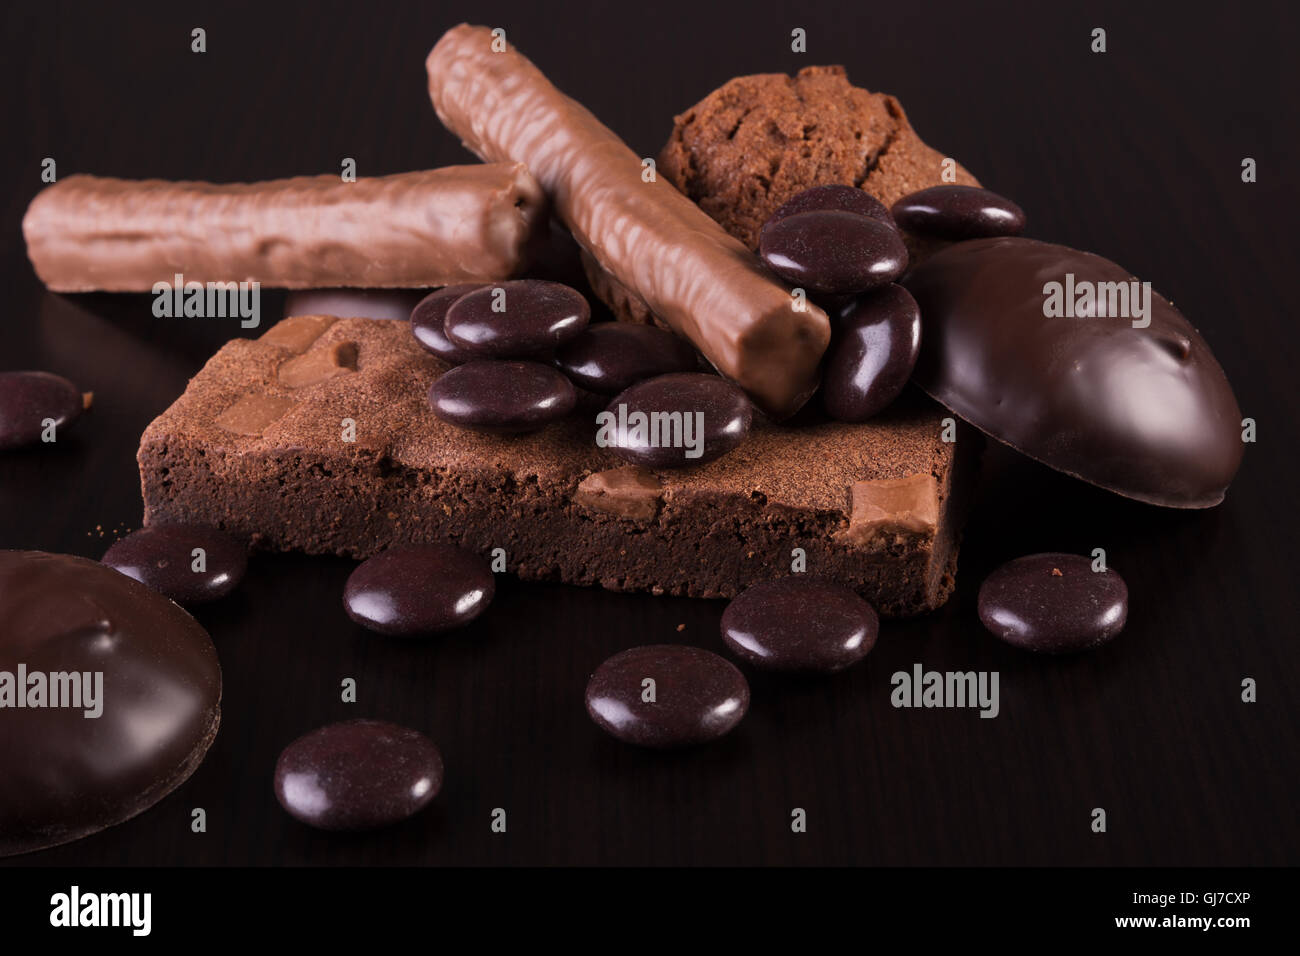 Variety of Chocolate sweets on dark wooden background Stock Photo